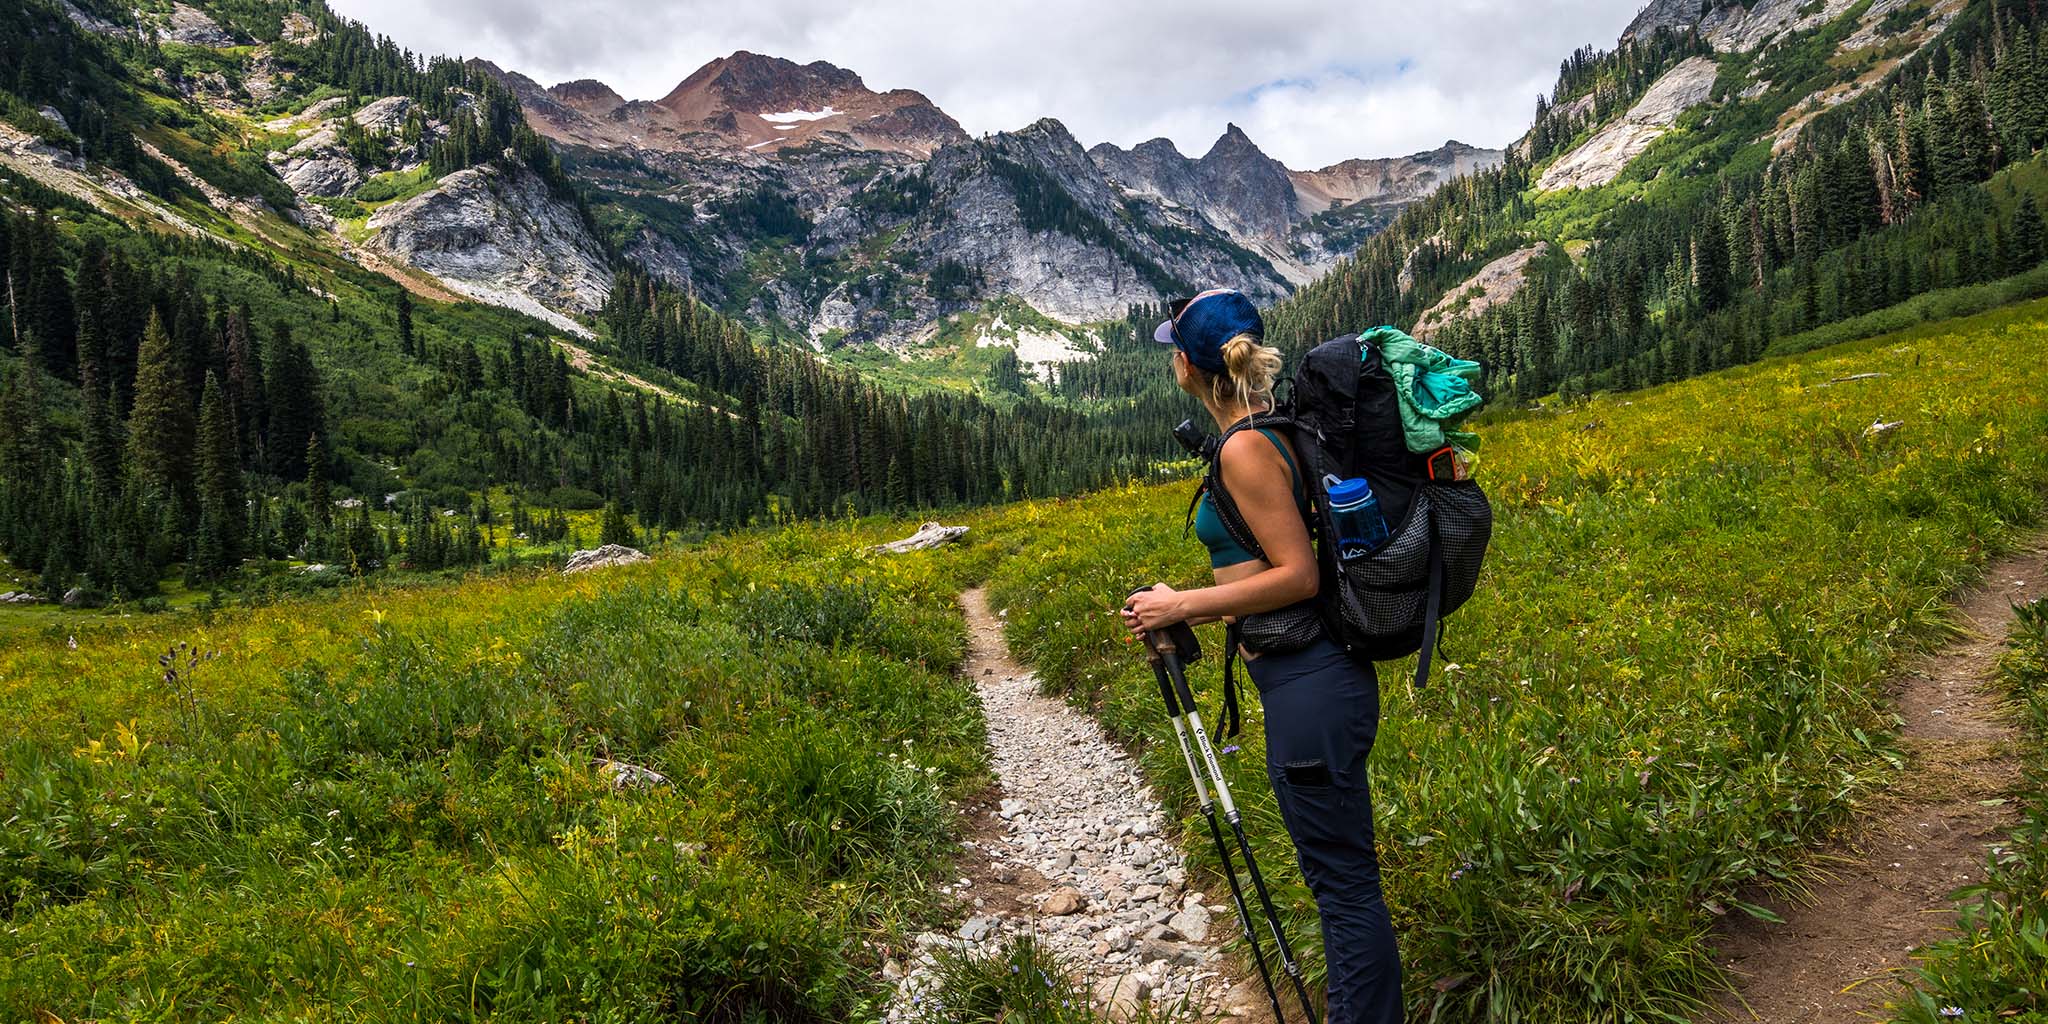 PACKING LIST FOR MULTI-DAY HIKING TRIPS